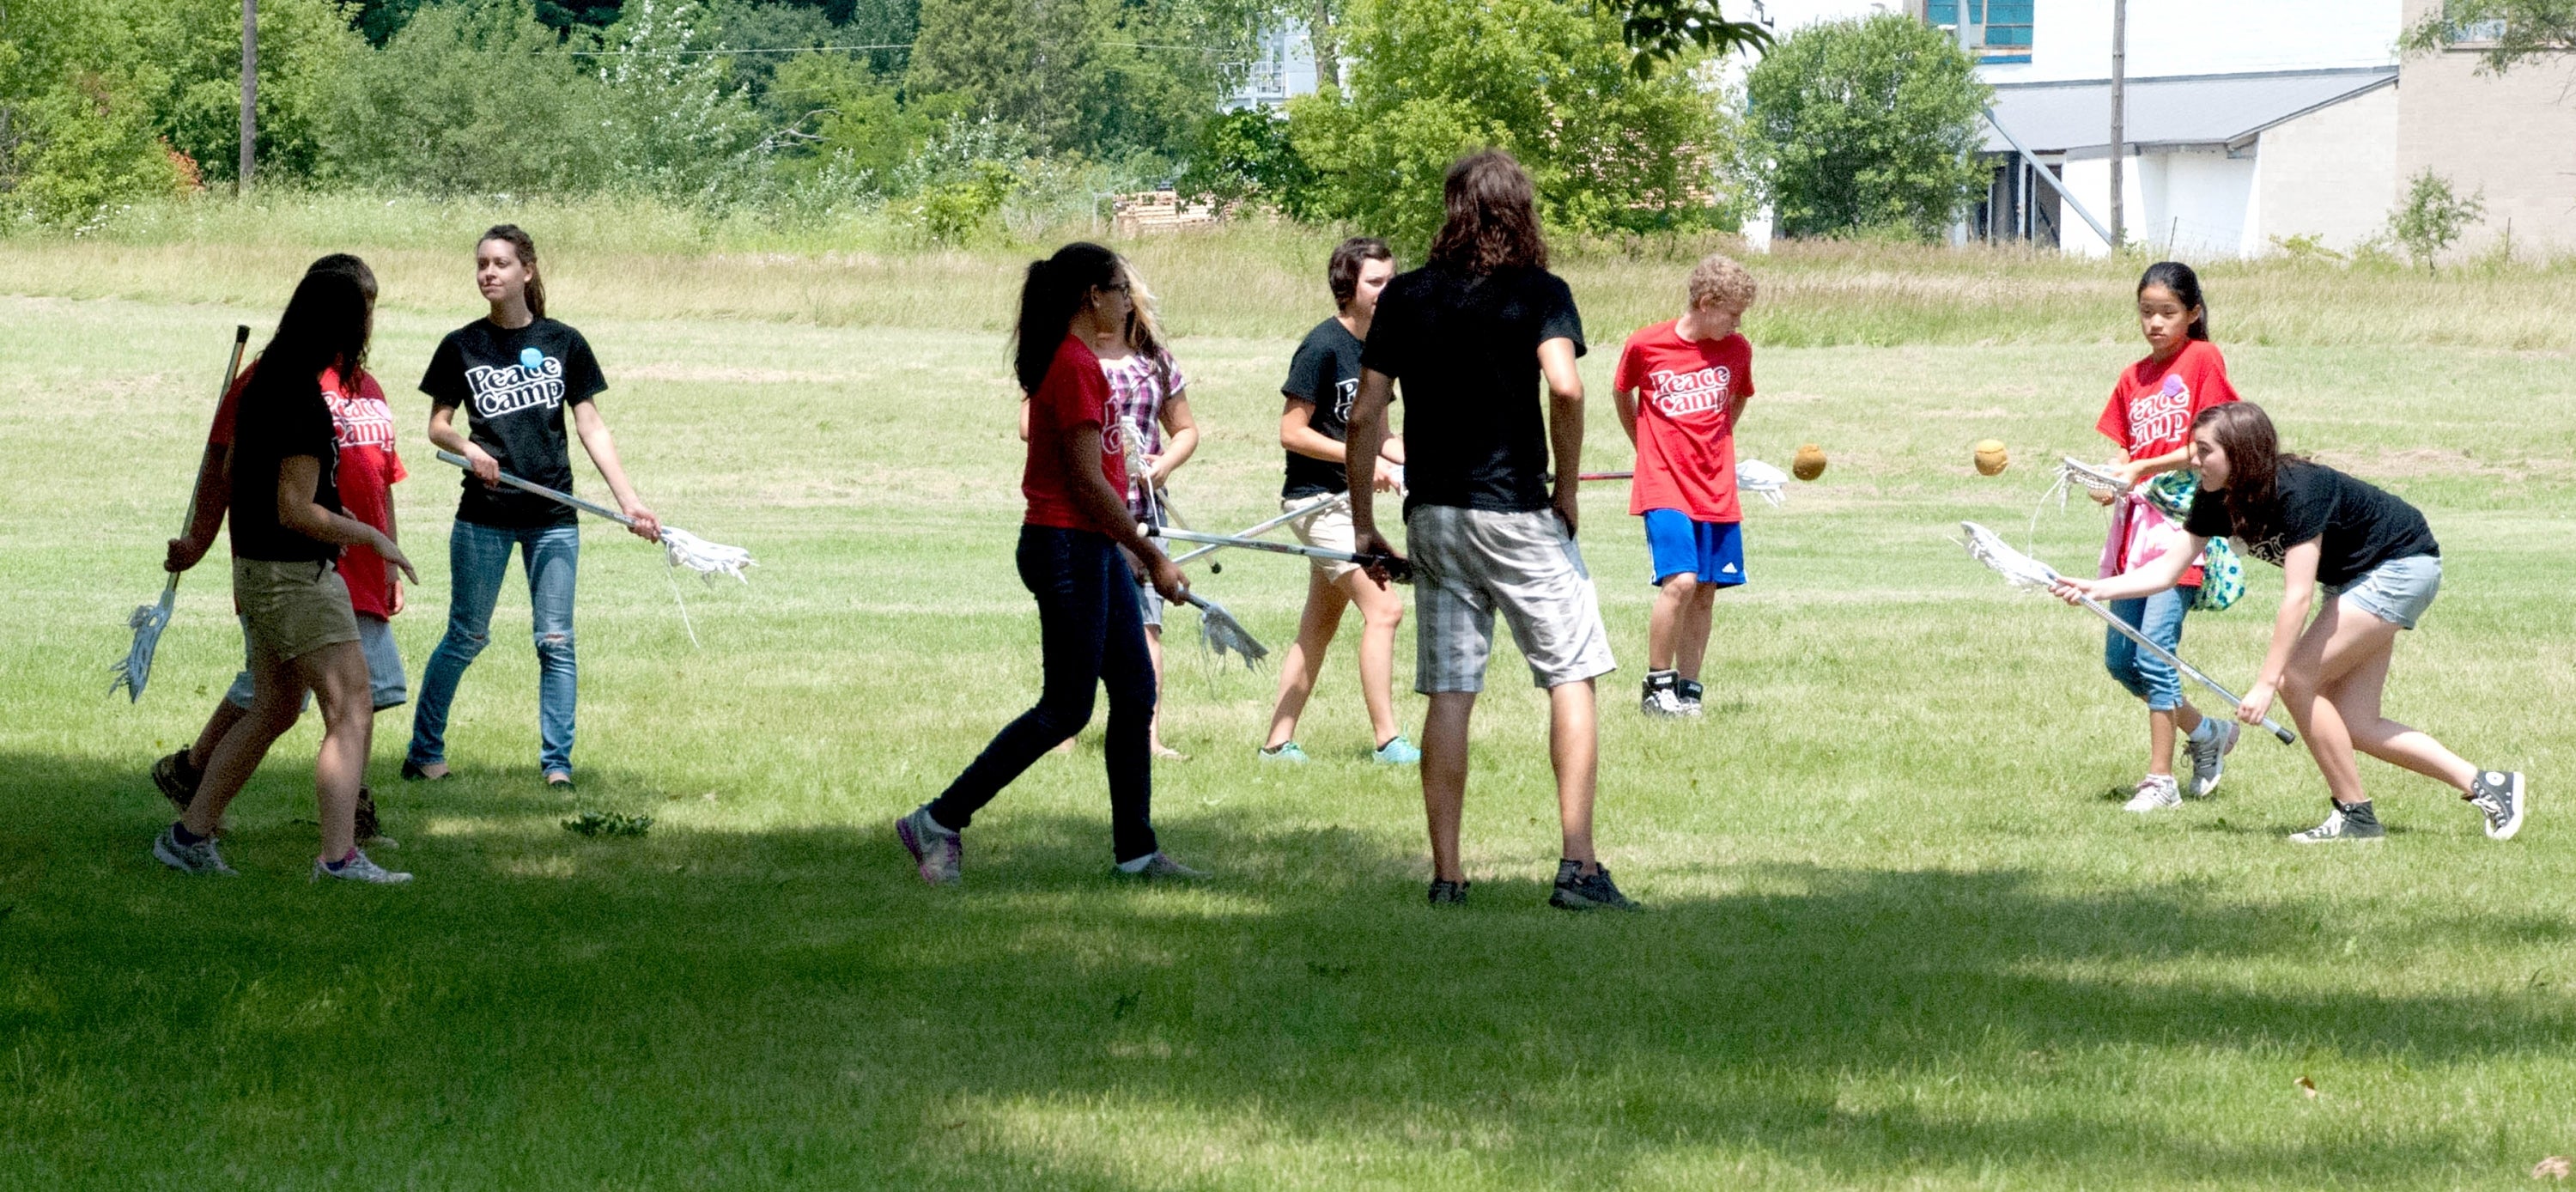 youth playing games in a field